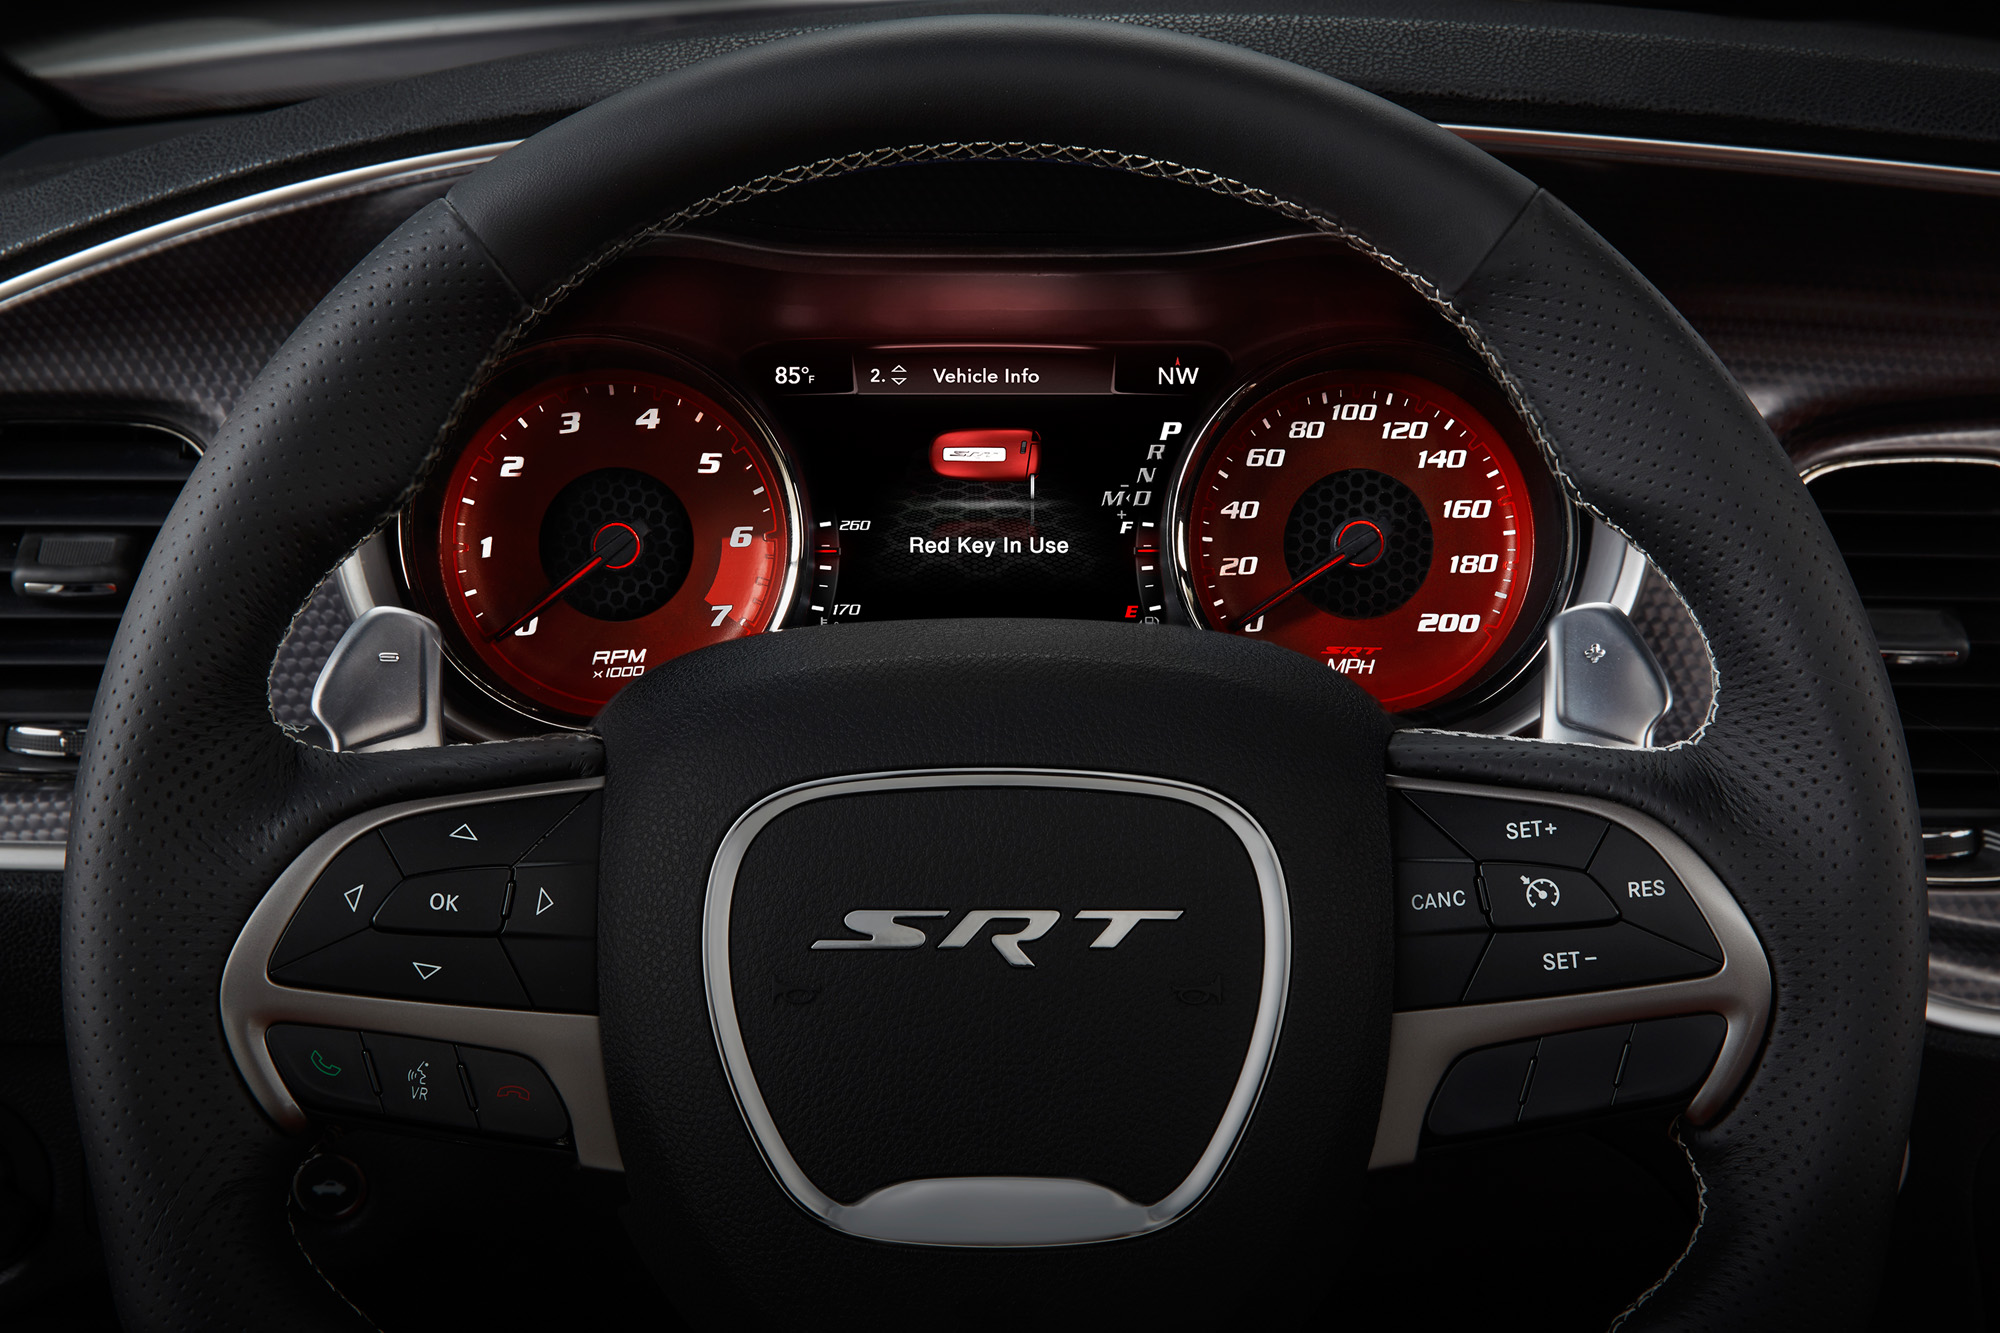 2015 Dodge Charger SRT - red key screen